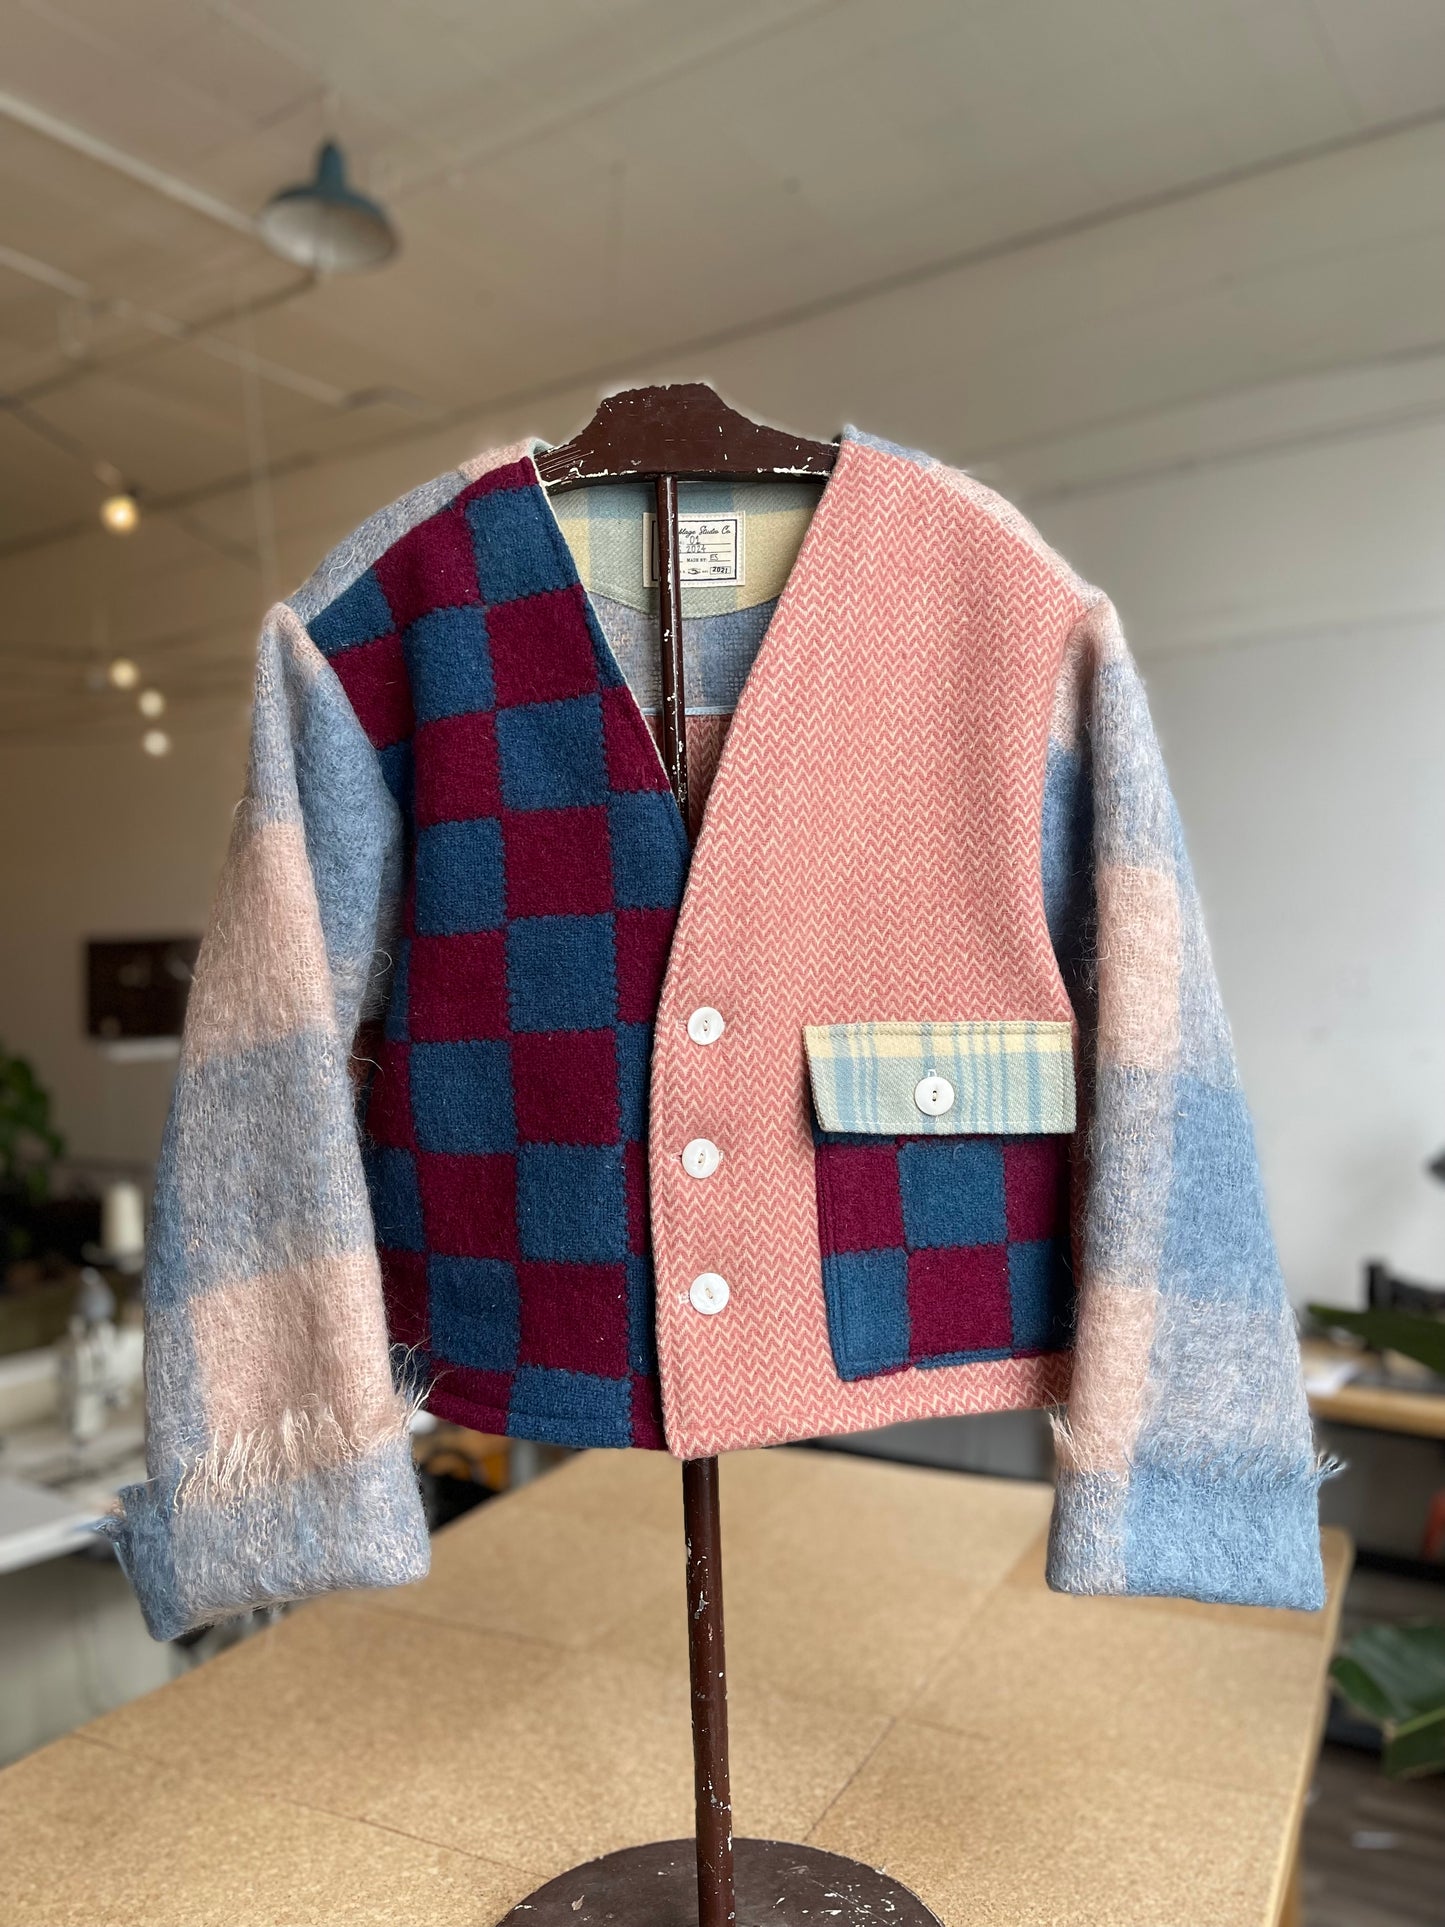 Cotton Candy Cardigan [S]